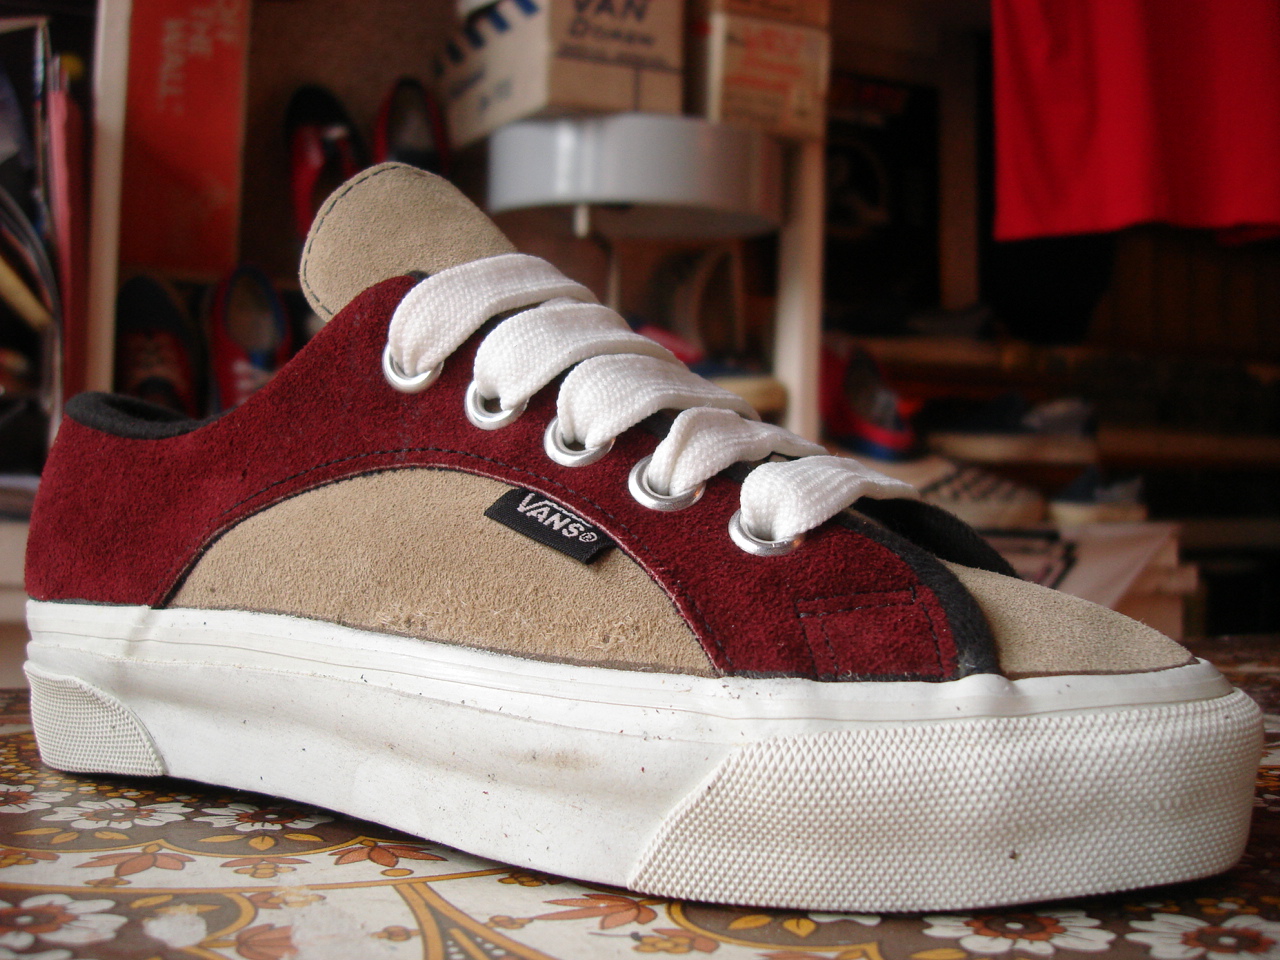 theothersideofthepillow: vintage VANS 2-tone suede LAMPIN style